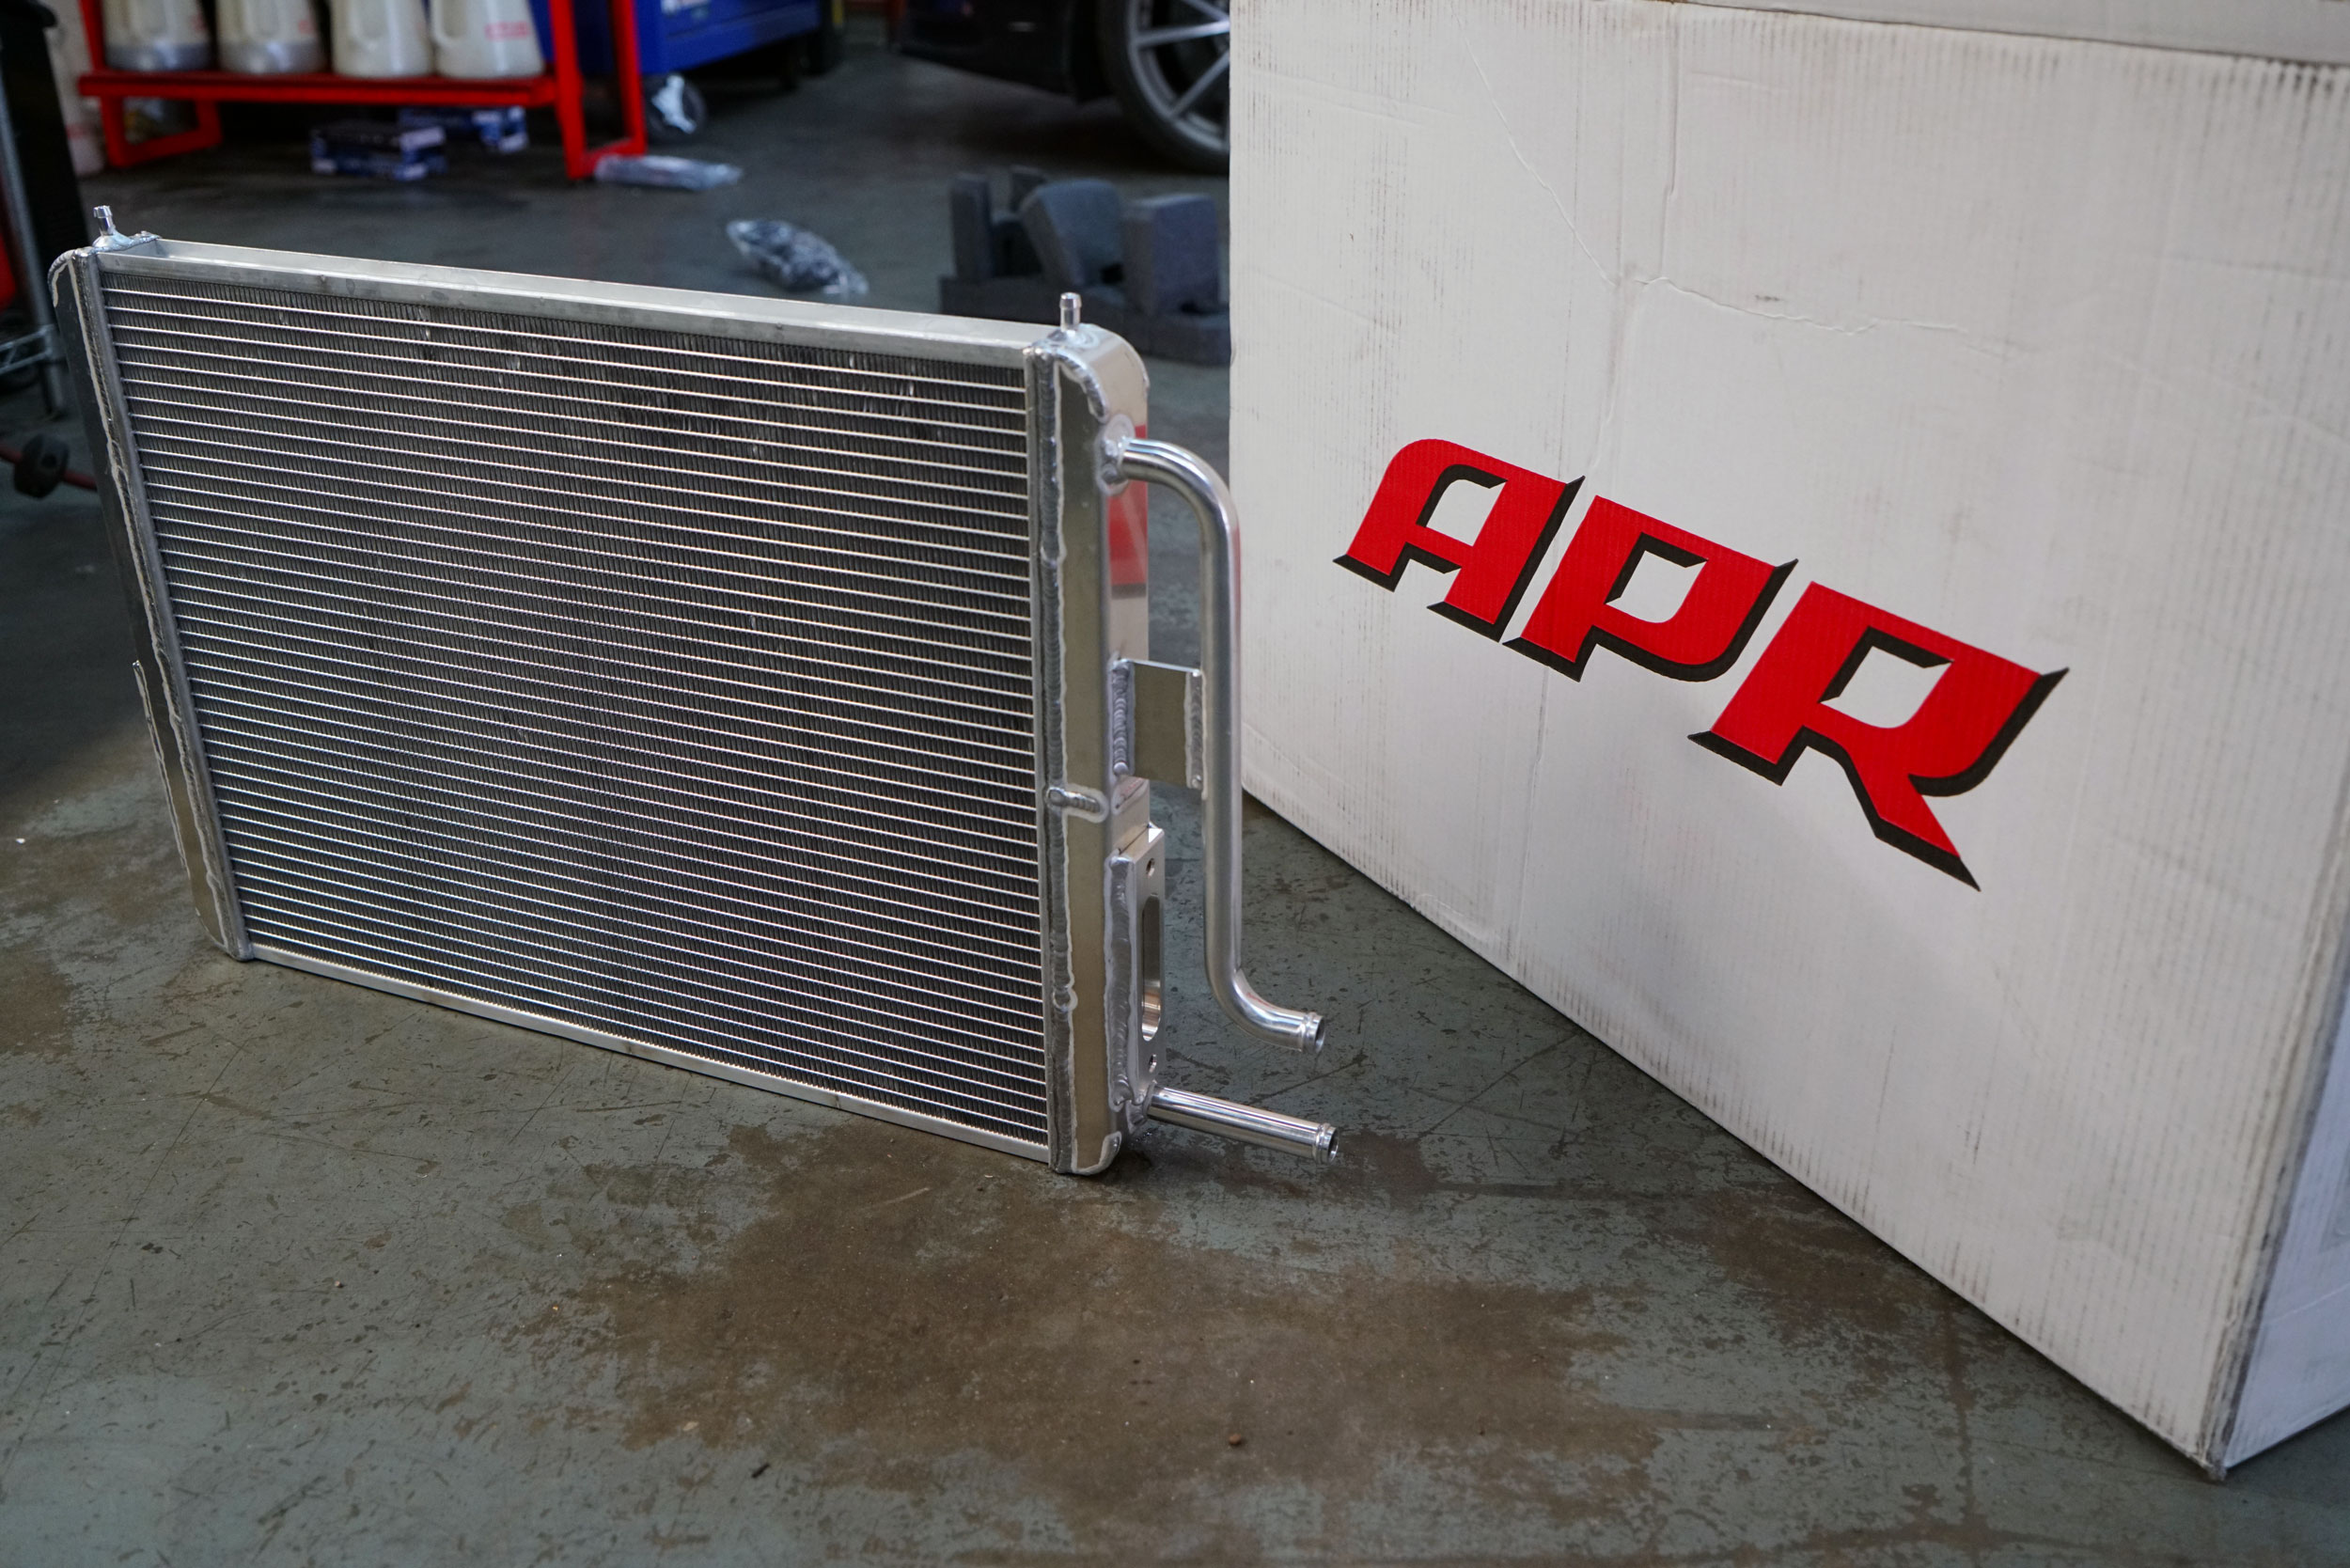 We offer you high-quality Radiator Repair Services in Denver, CO for any european car at BWP.